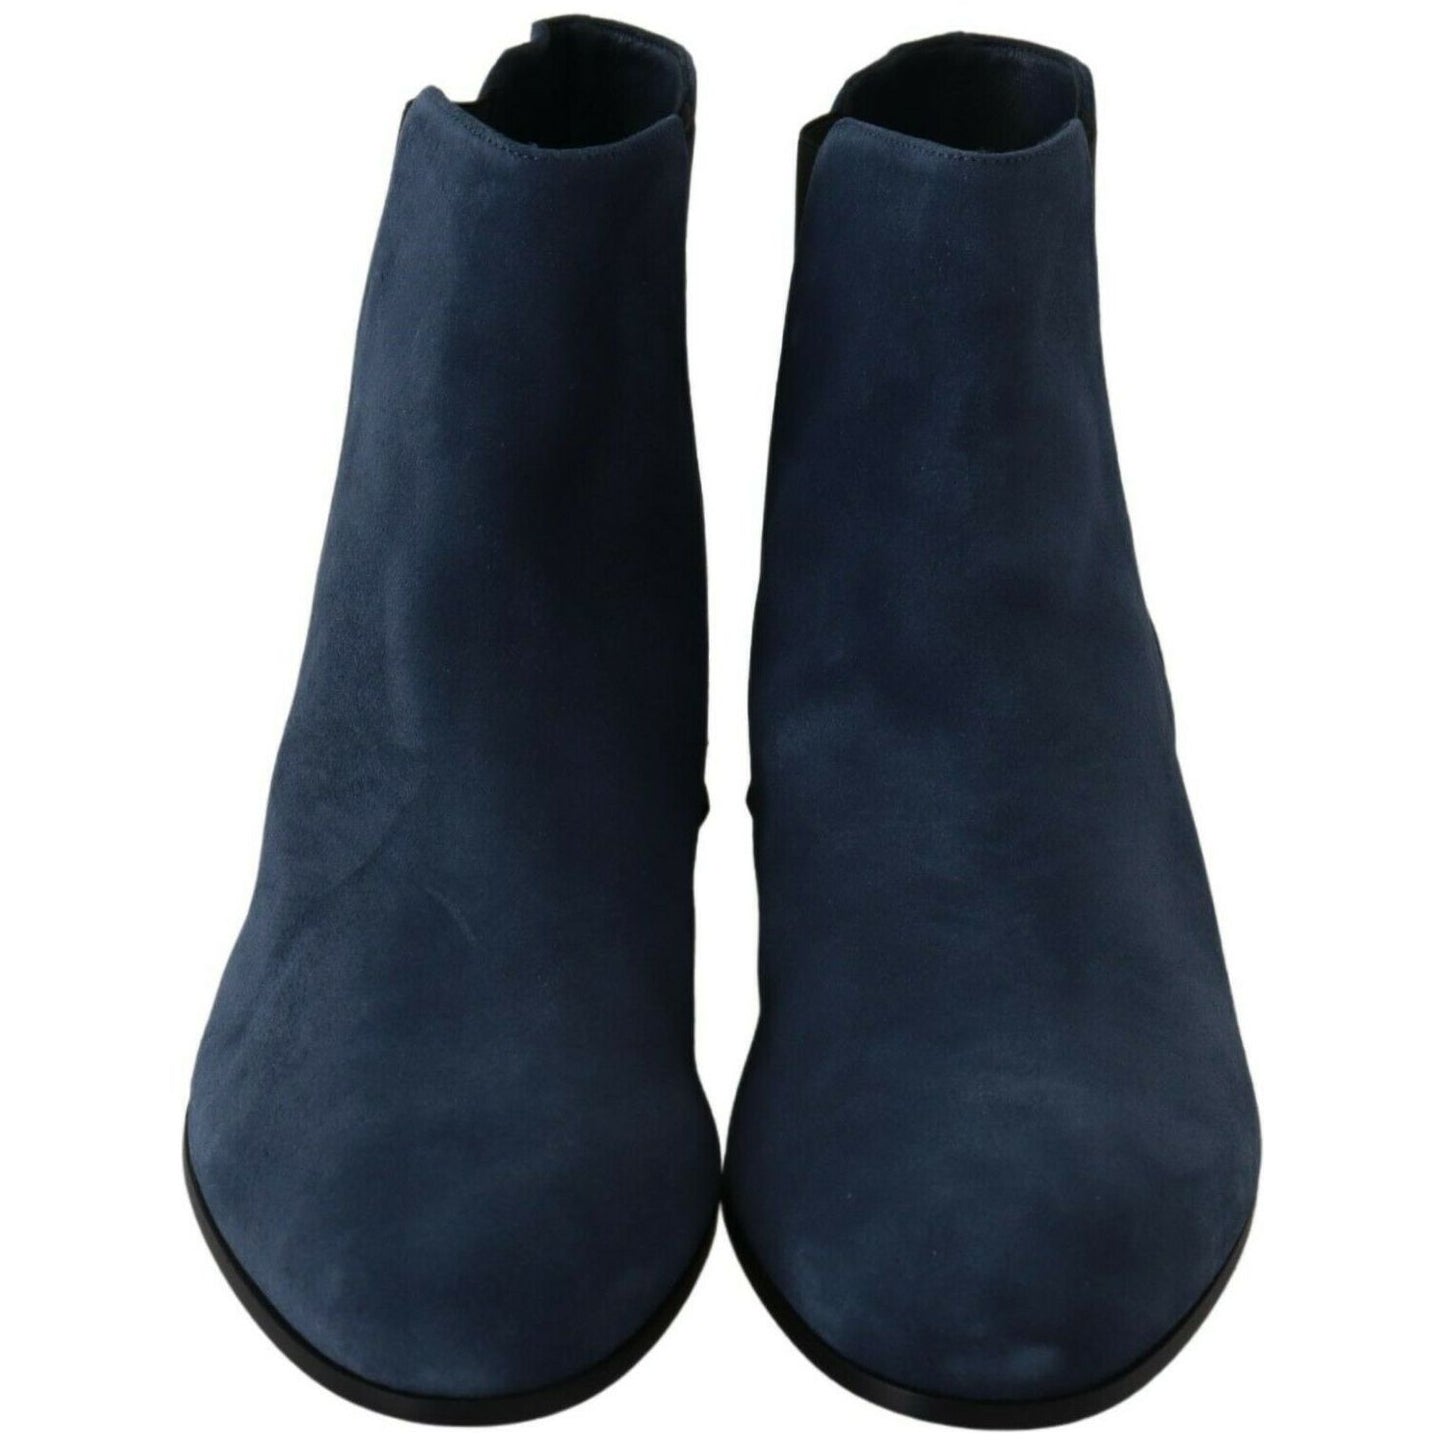 Dolce & Gabbana Chic Blue Suede Mid-Calf Boots with Stud Details WOMAN BOOTS blue-suede-embellished-studded-boots-shoes s-l1600-2022-06-30T120604.422-19892989-a06.jpg